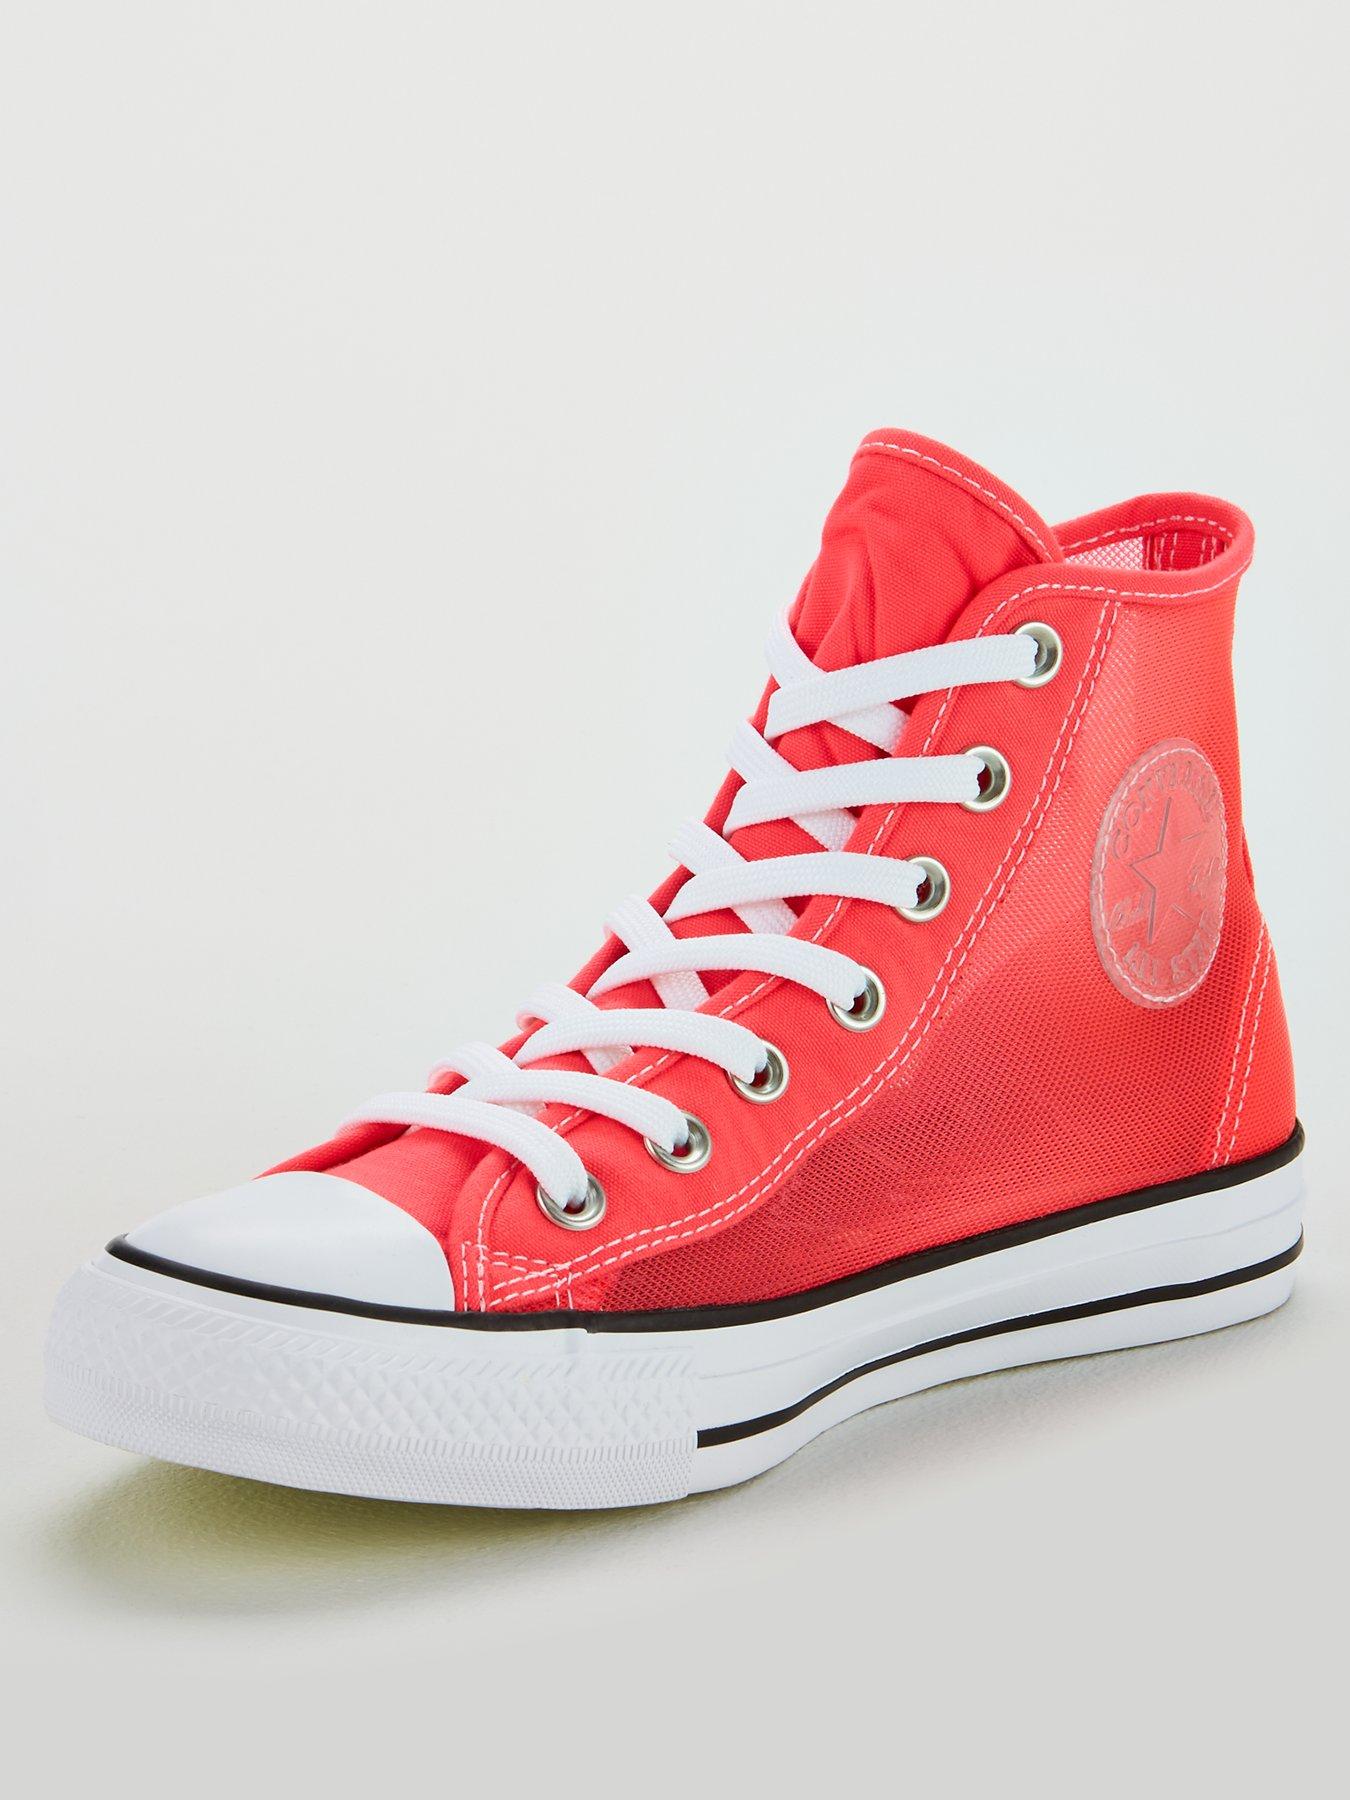 red converse high tops size 3